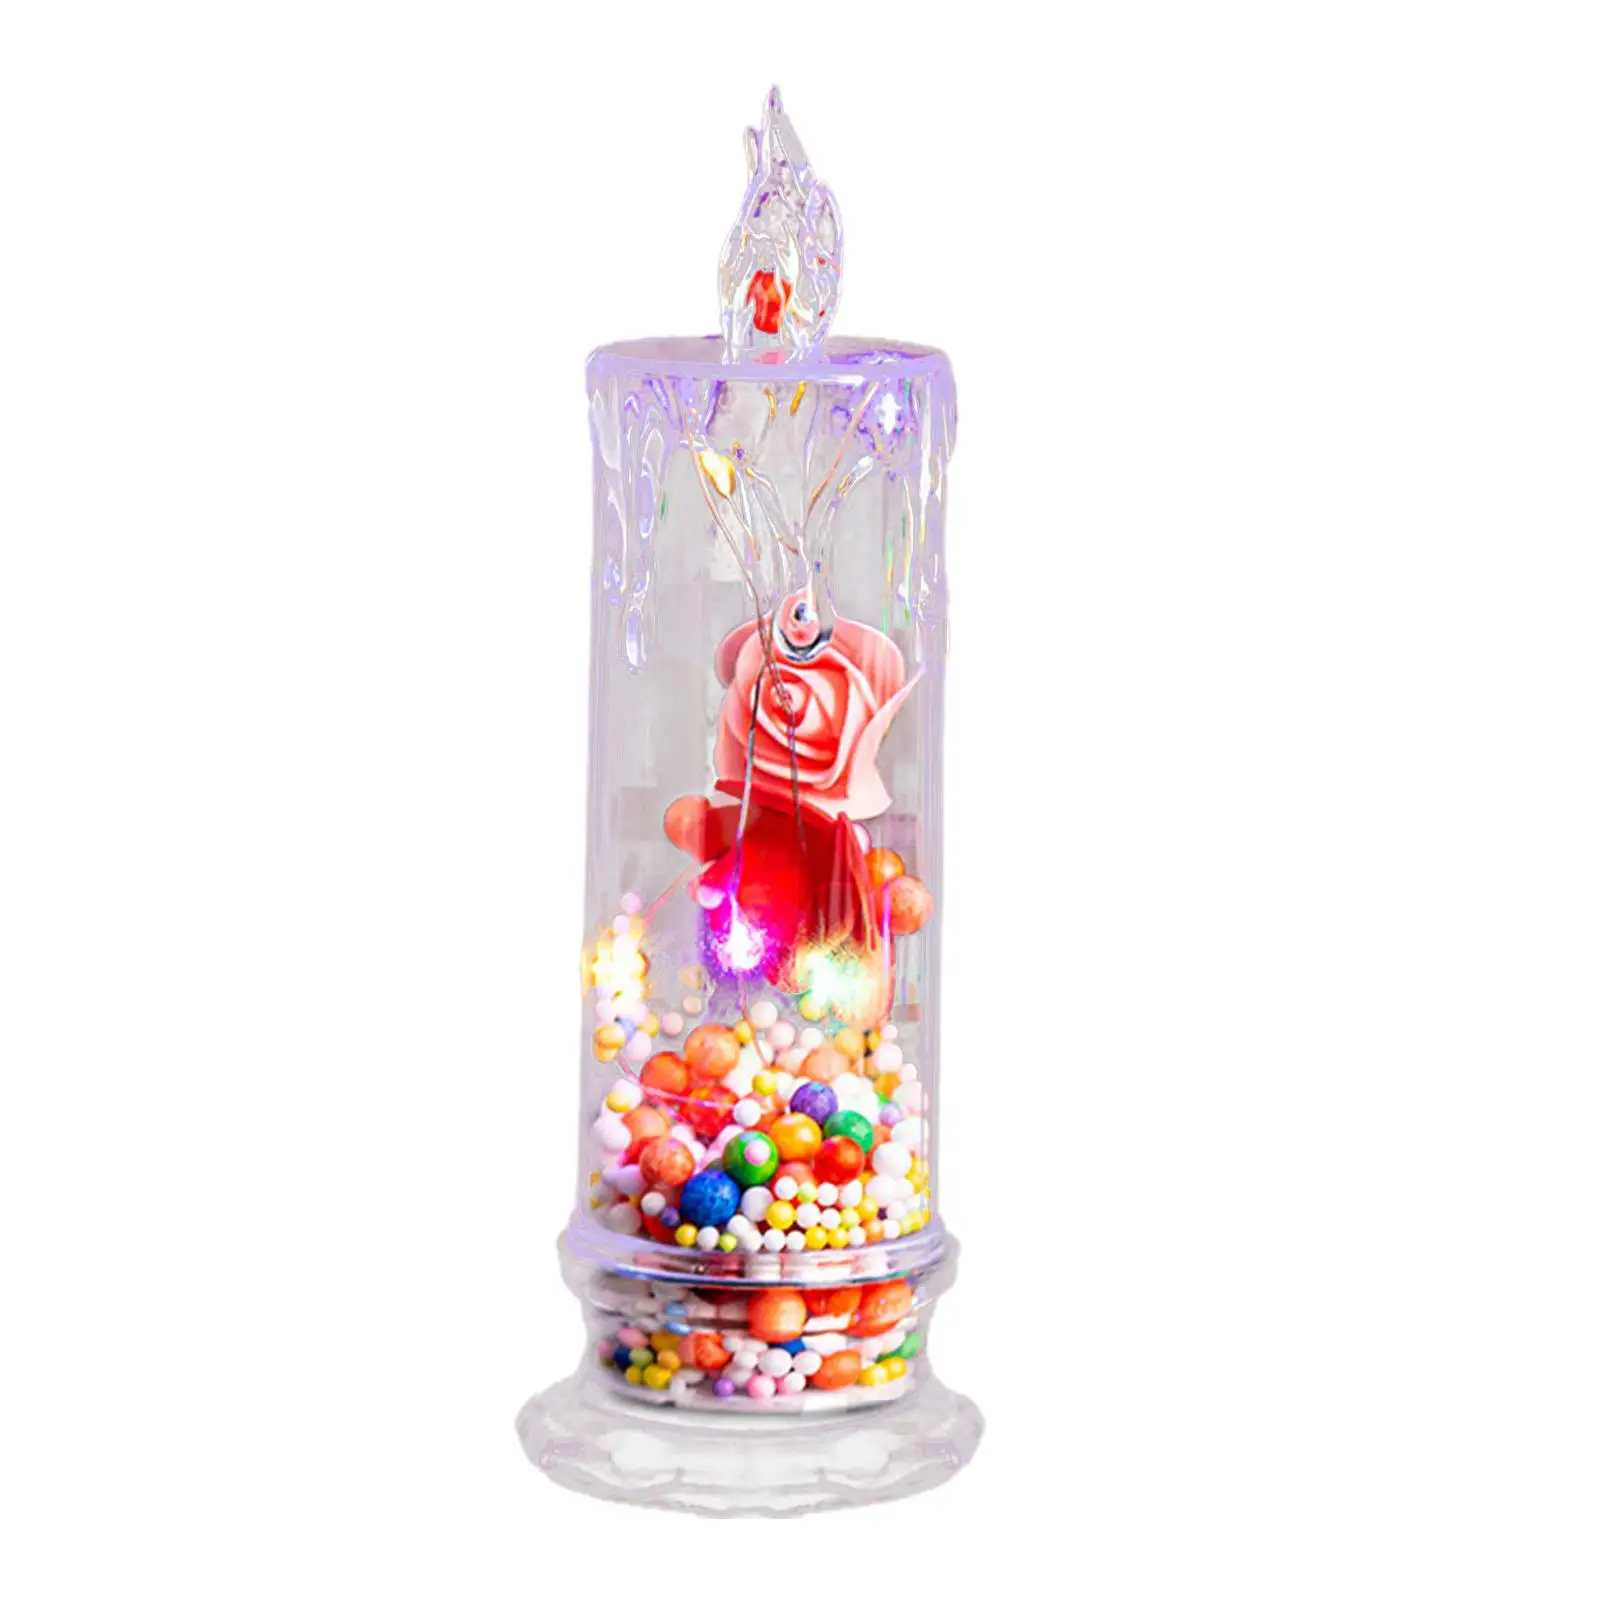 Preserved Rose Gifts with Colorful Lights Handmade Enchanted Rose Beautiful LED Preserved Rose for Teens Girlfriend Him Her Kids